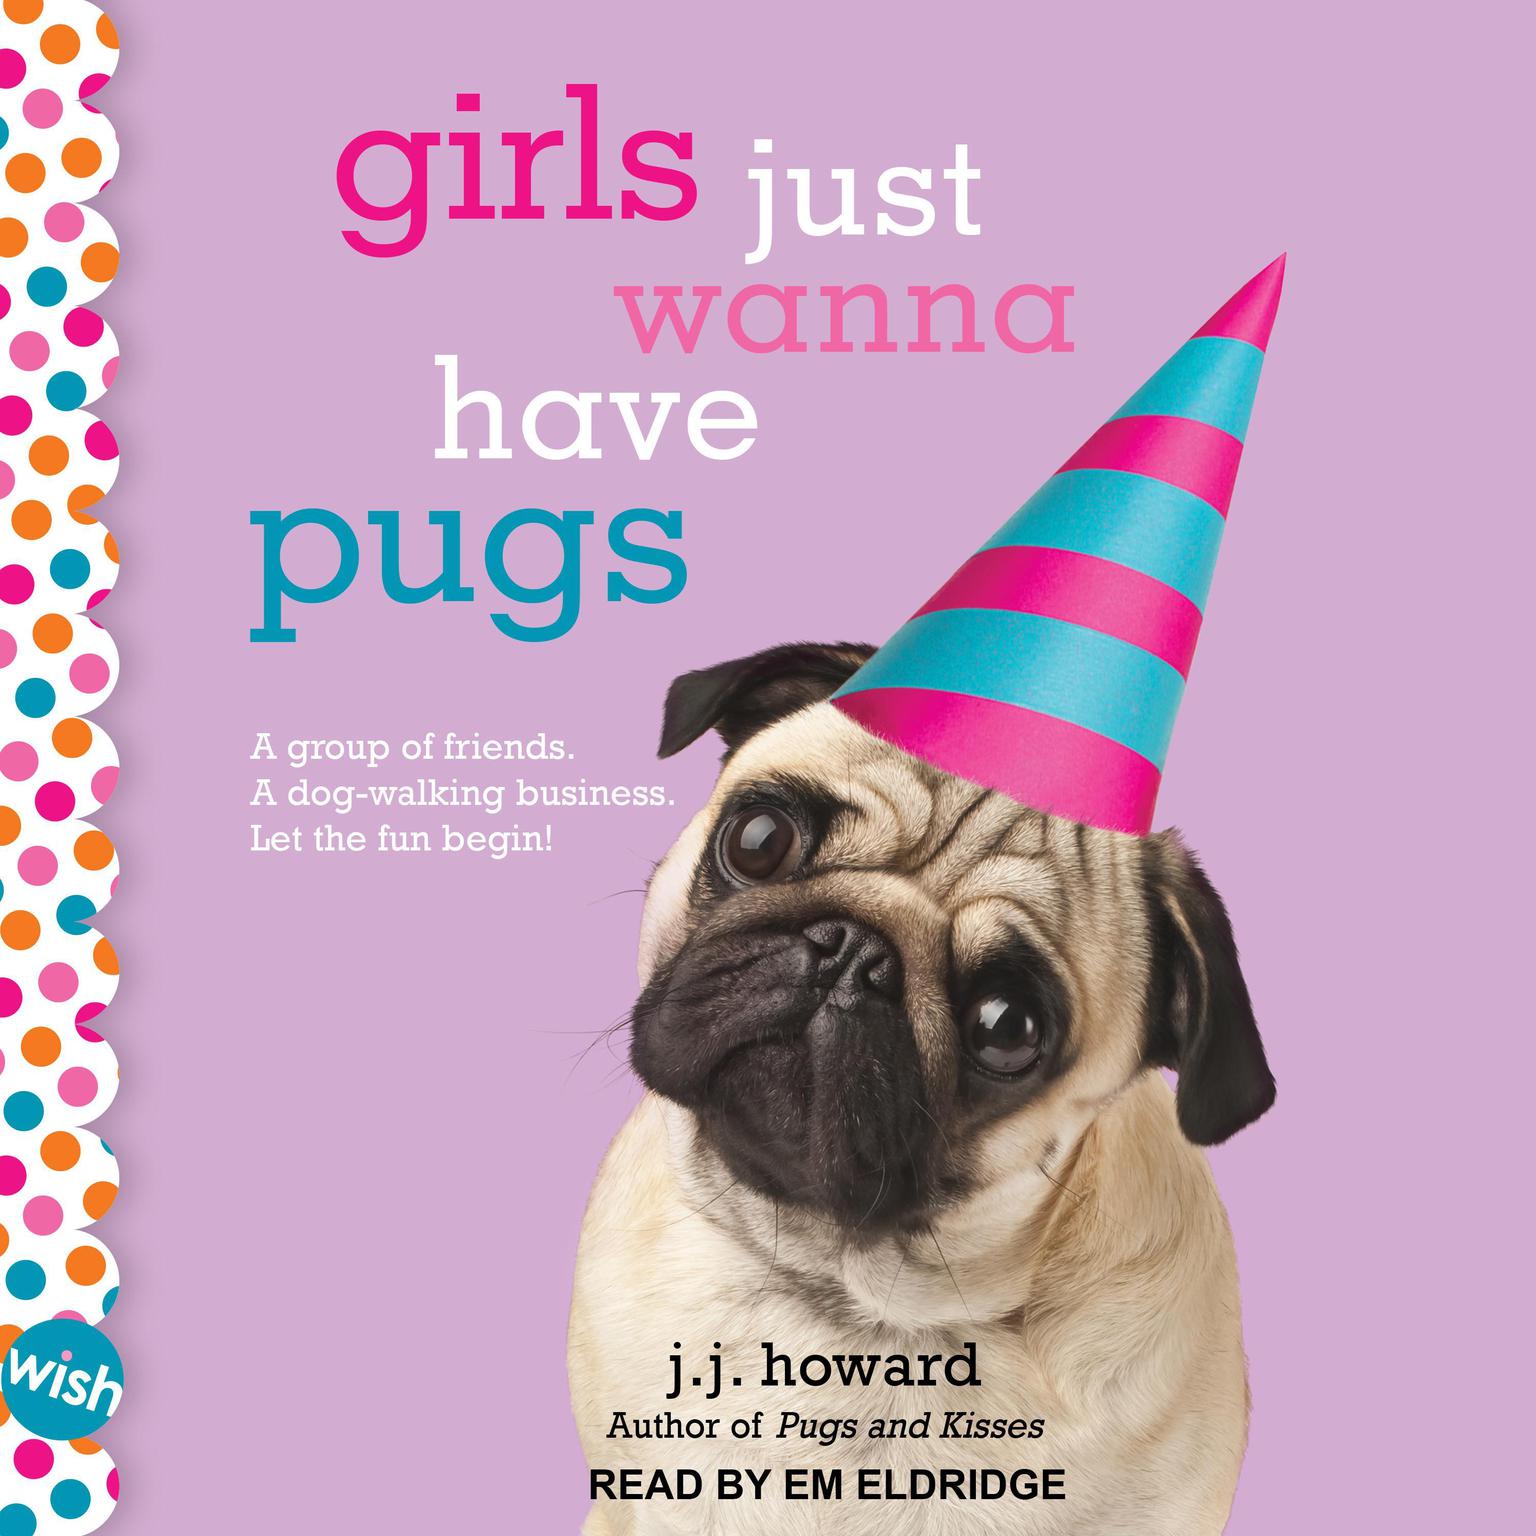 Girls Just Wanna Have Pugs: A Wish Novel Audiobook, by J.J. Howard